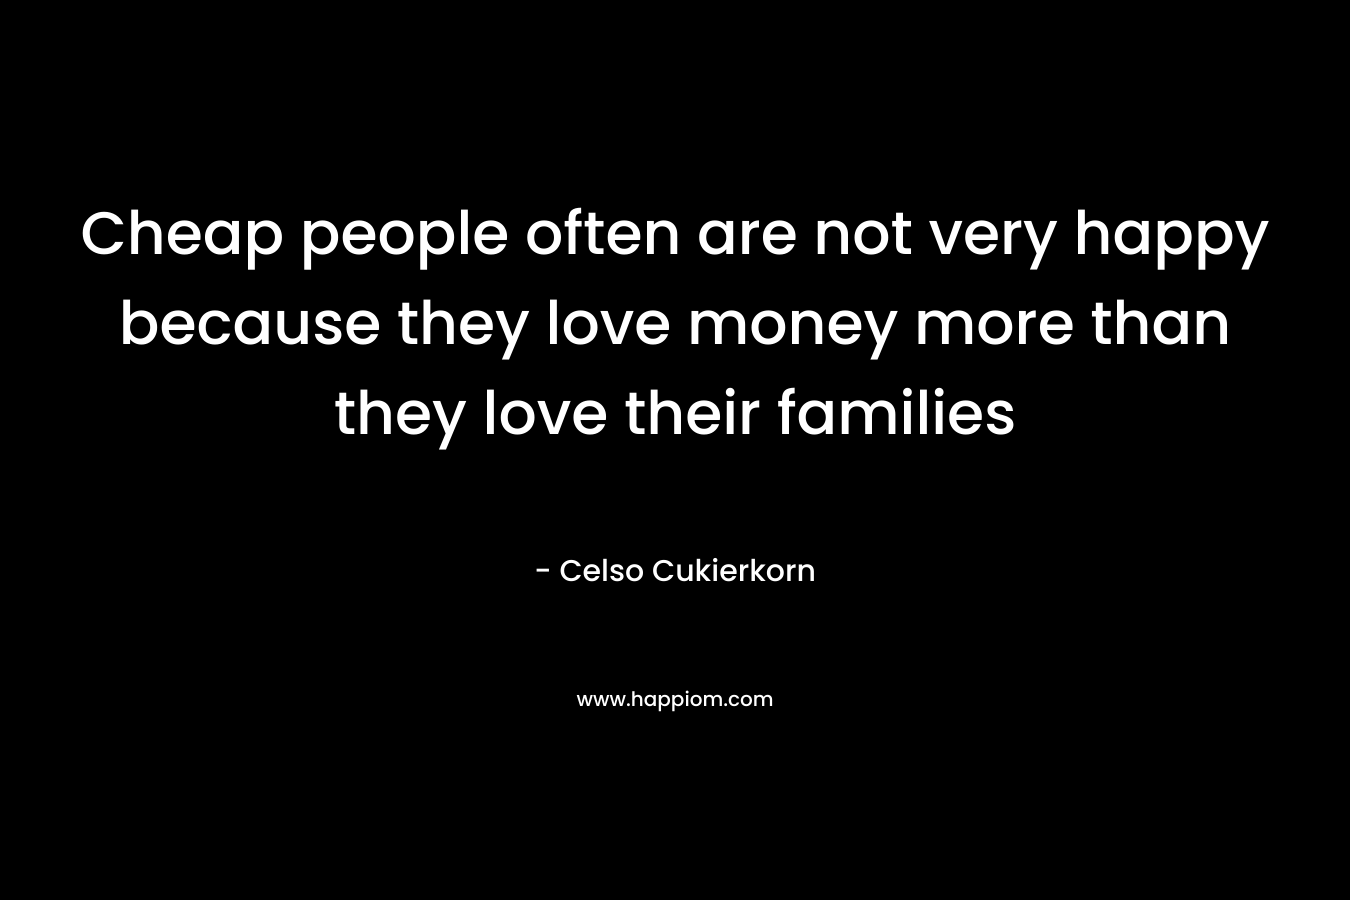 Cheap people often are not very happy because they love money more than they love their families